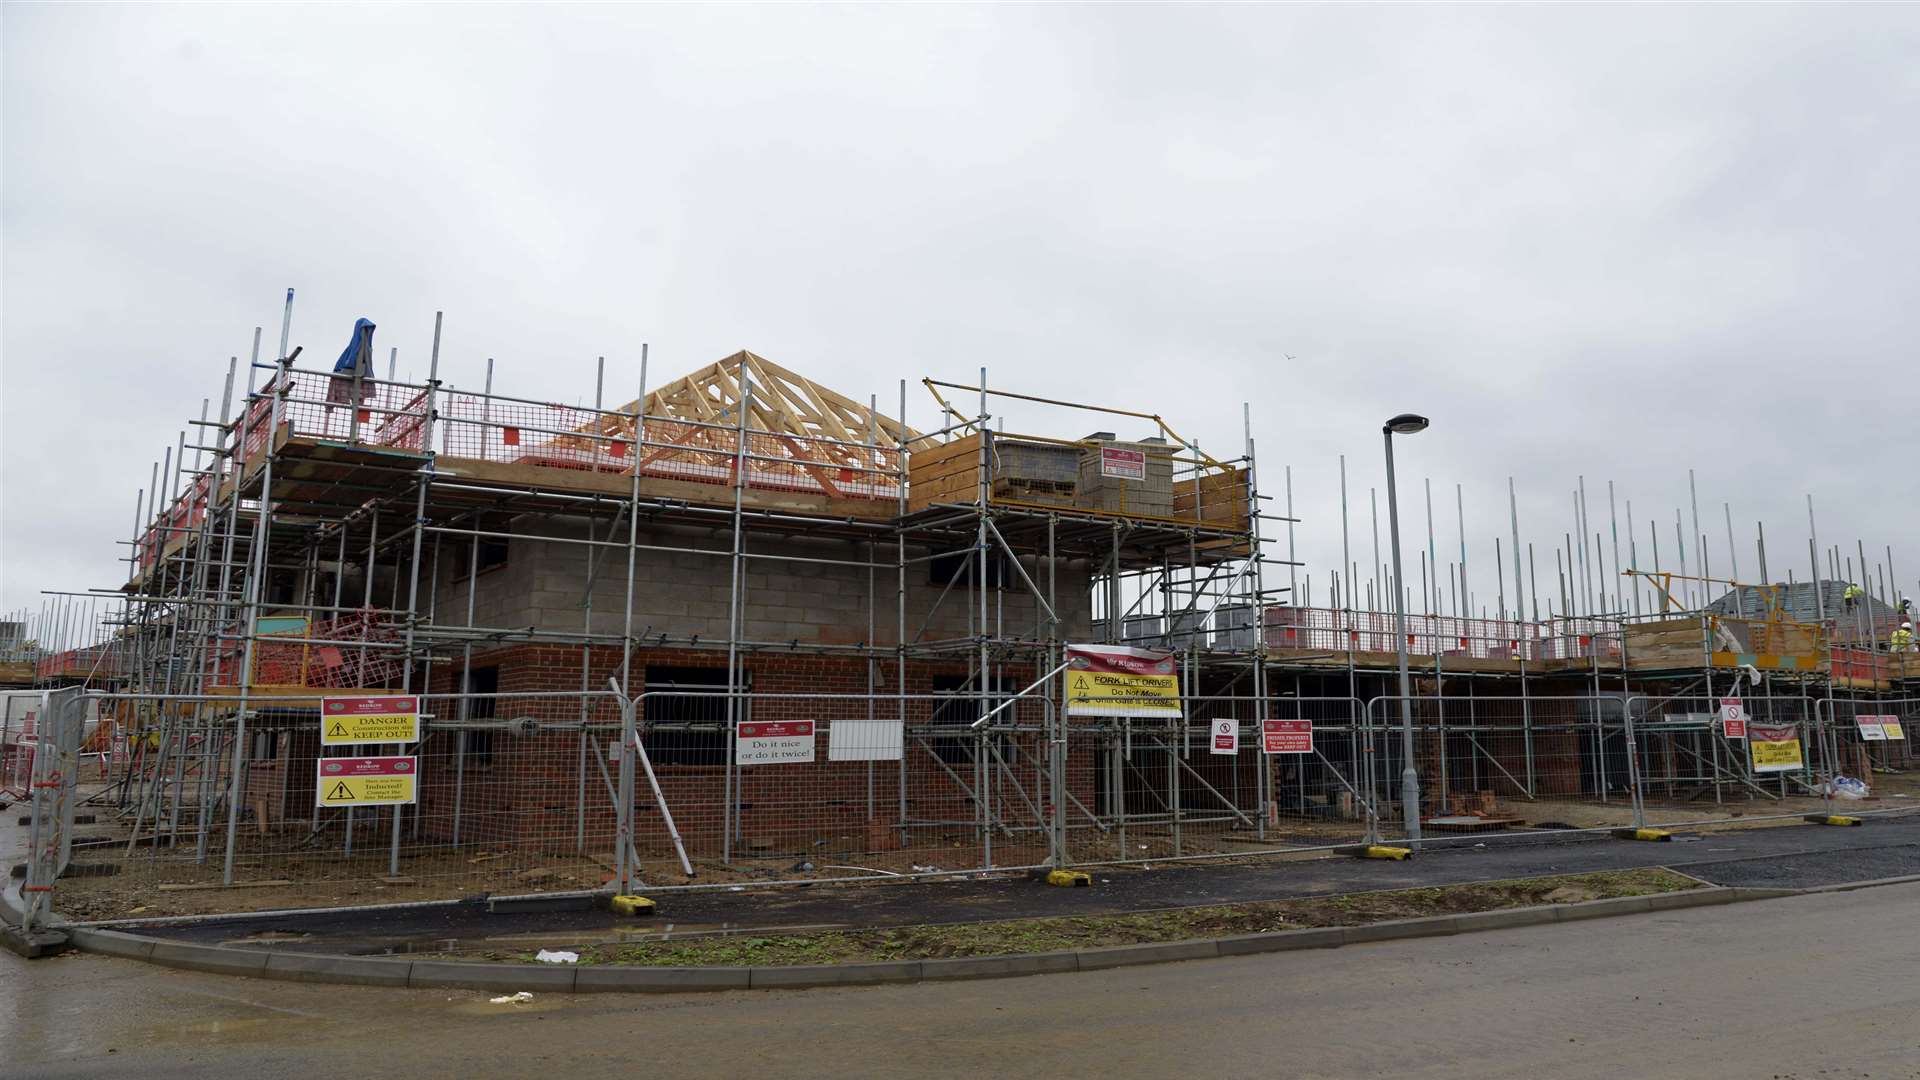 Archers Park, Sittingbourne: Redrow worker loses fingers in accident1920 x 1080